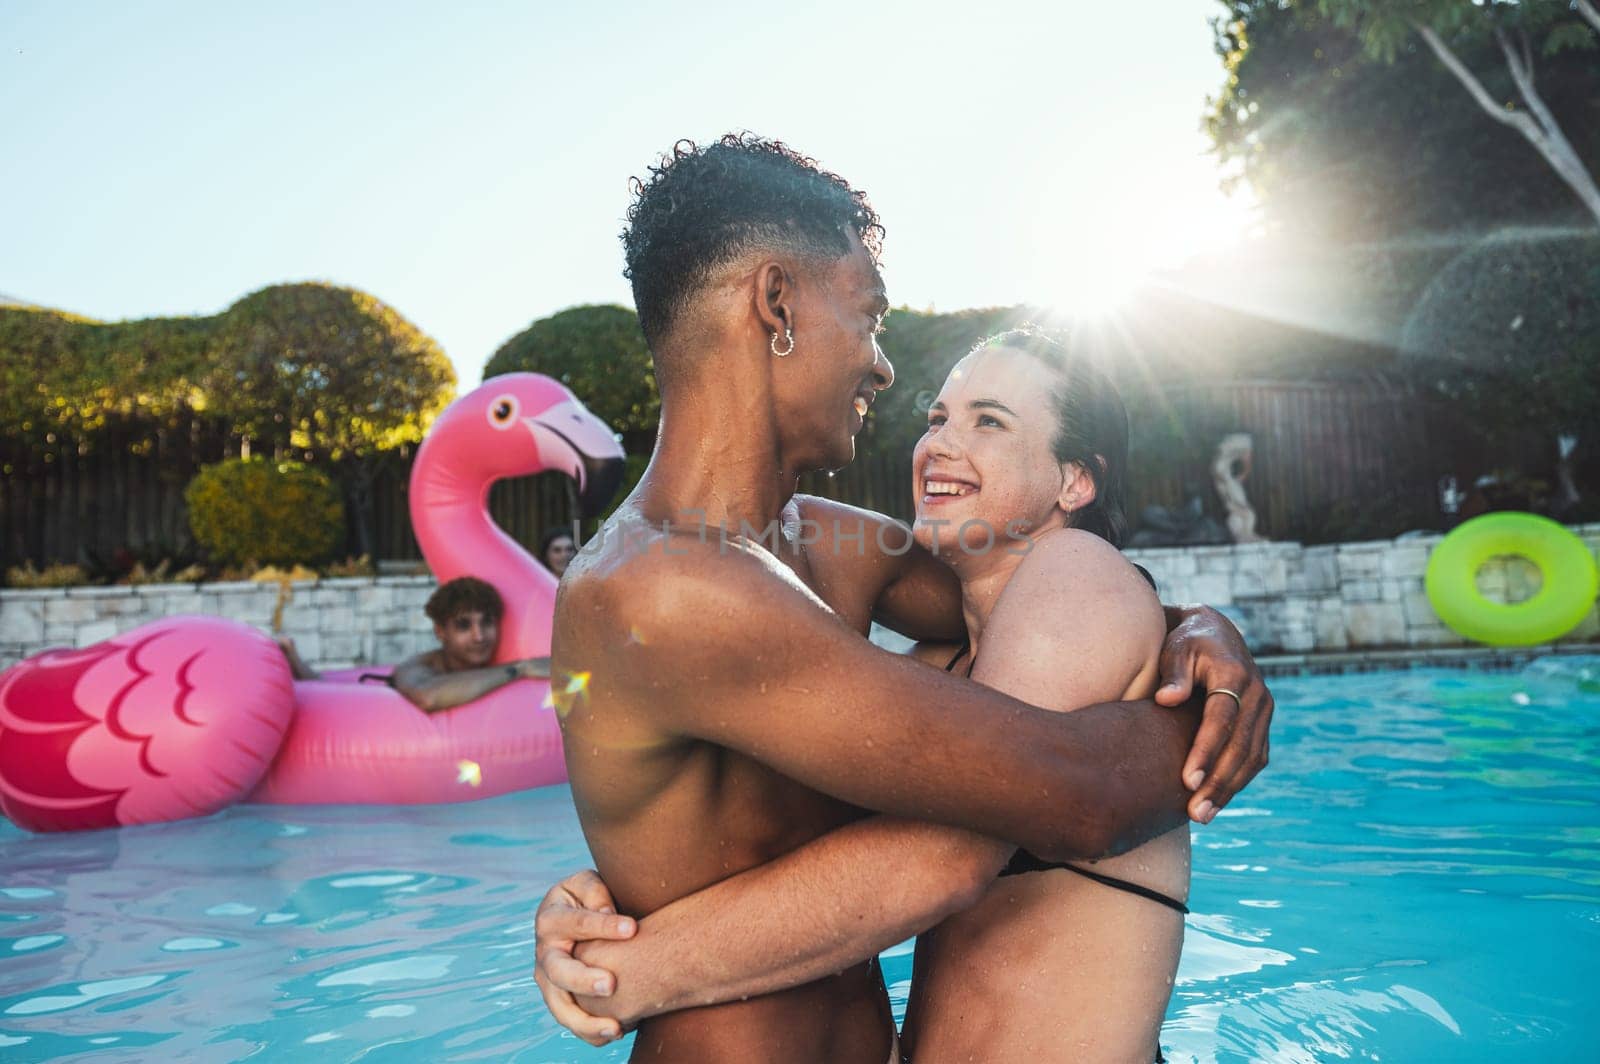 Pool party, love and couple hug, having fun and bonding together. Swimming, romance diversity and man and woman hugging, cuddle or laugh at funny joke in water at summer event or new year celebration.